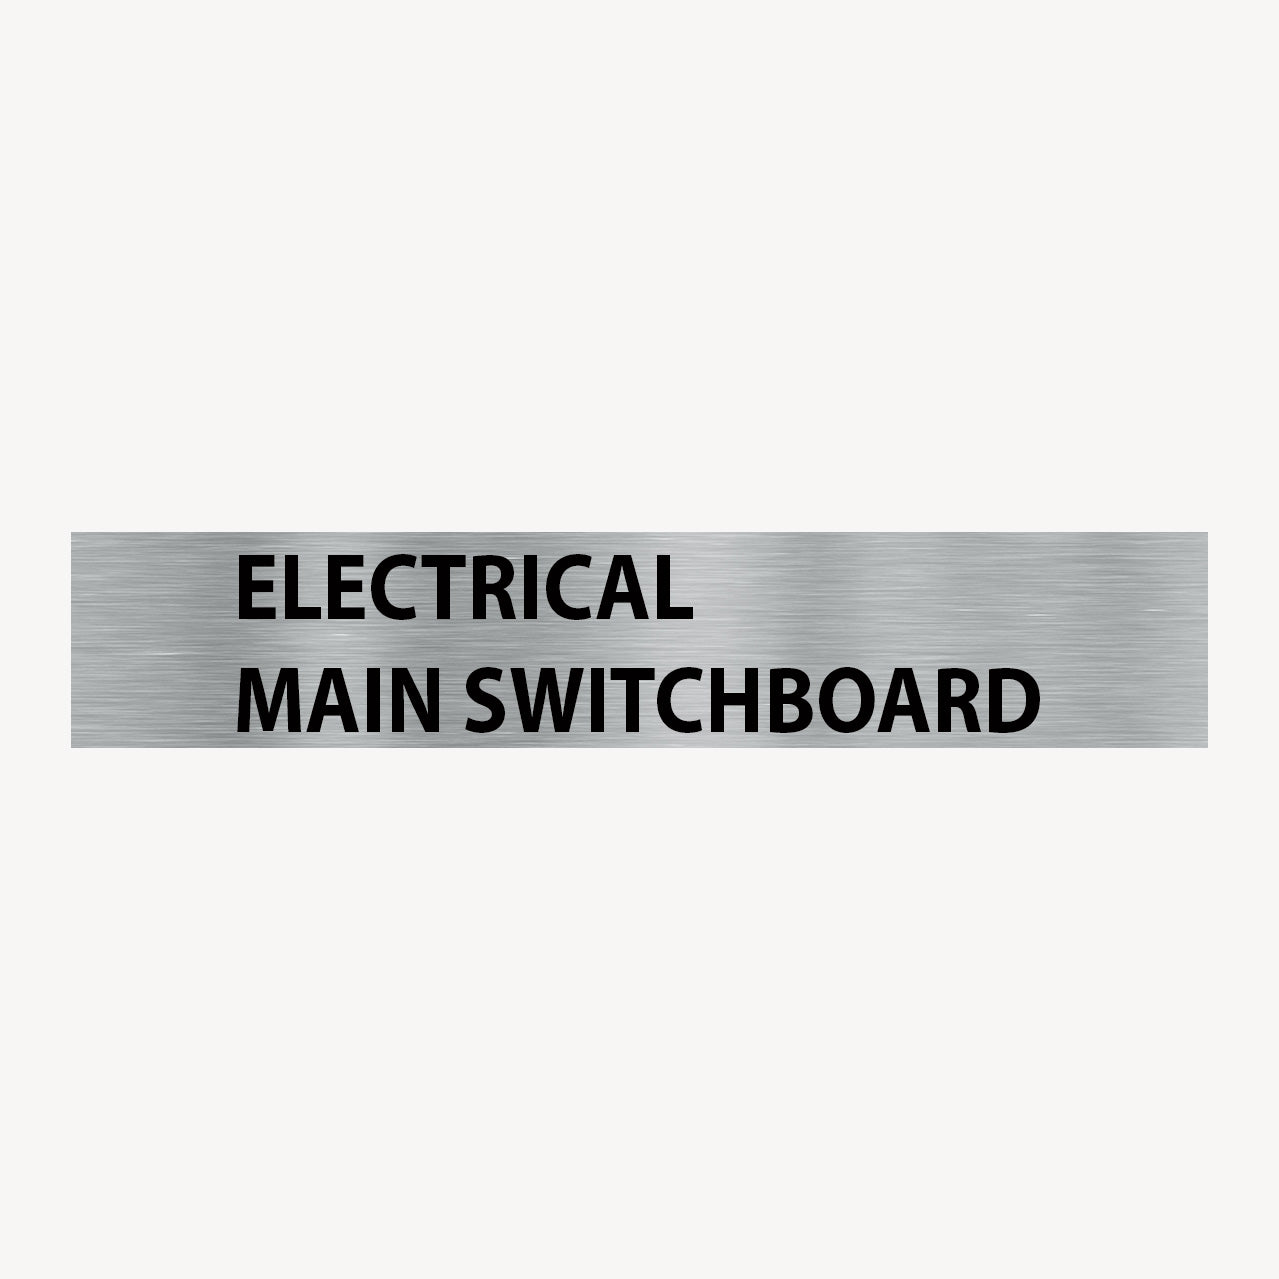 ELECTRICAL MAIN SWITCHBOARD SIGN